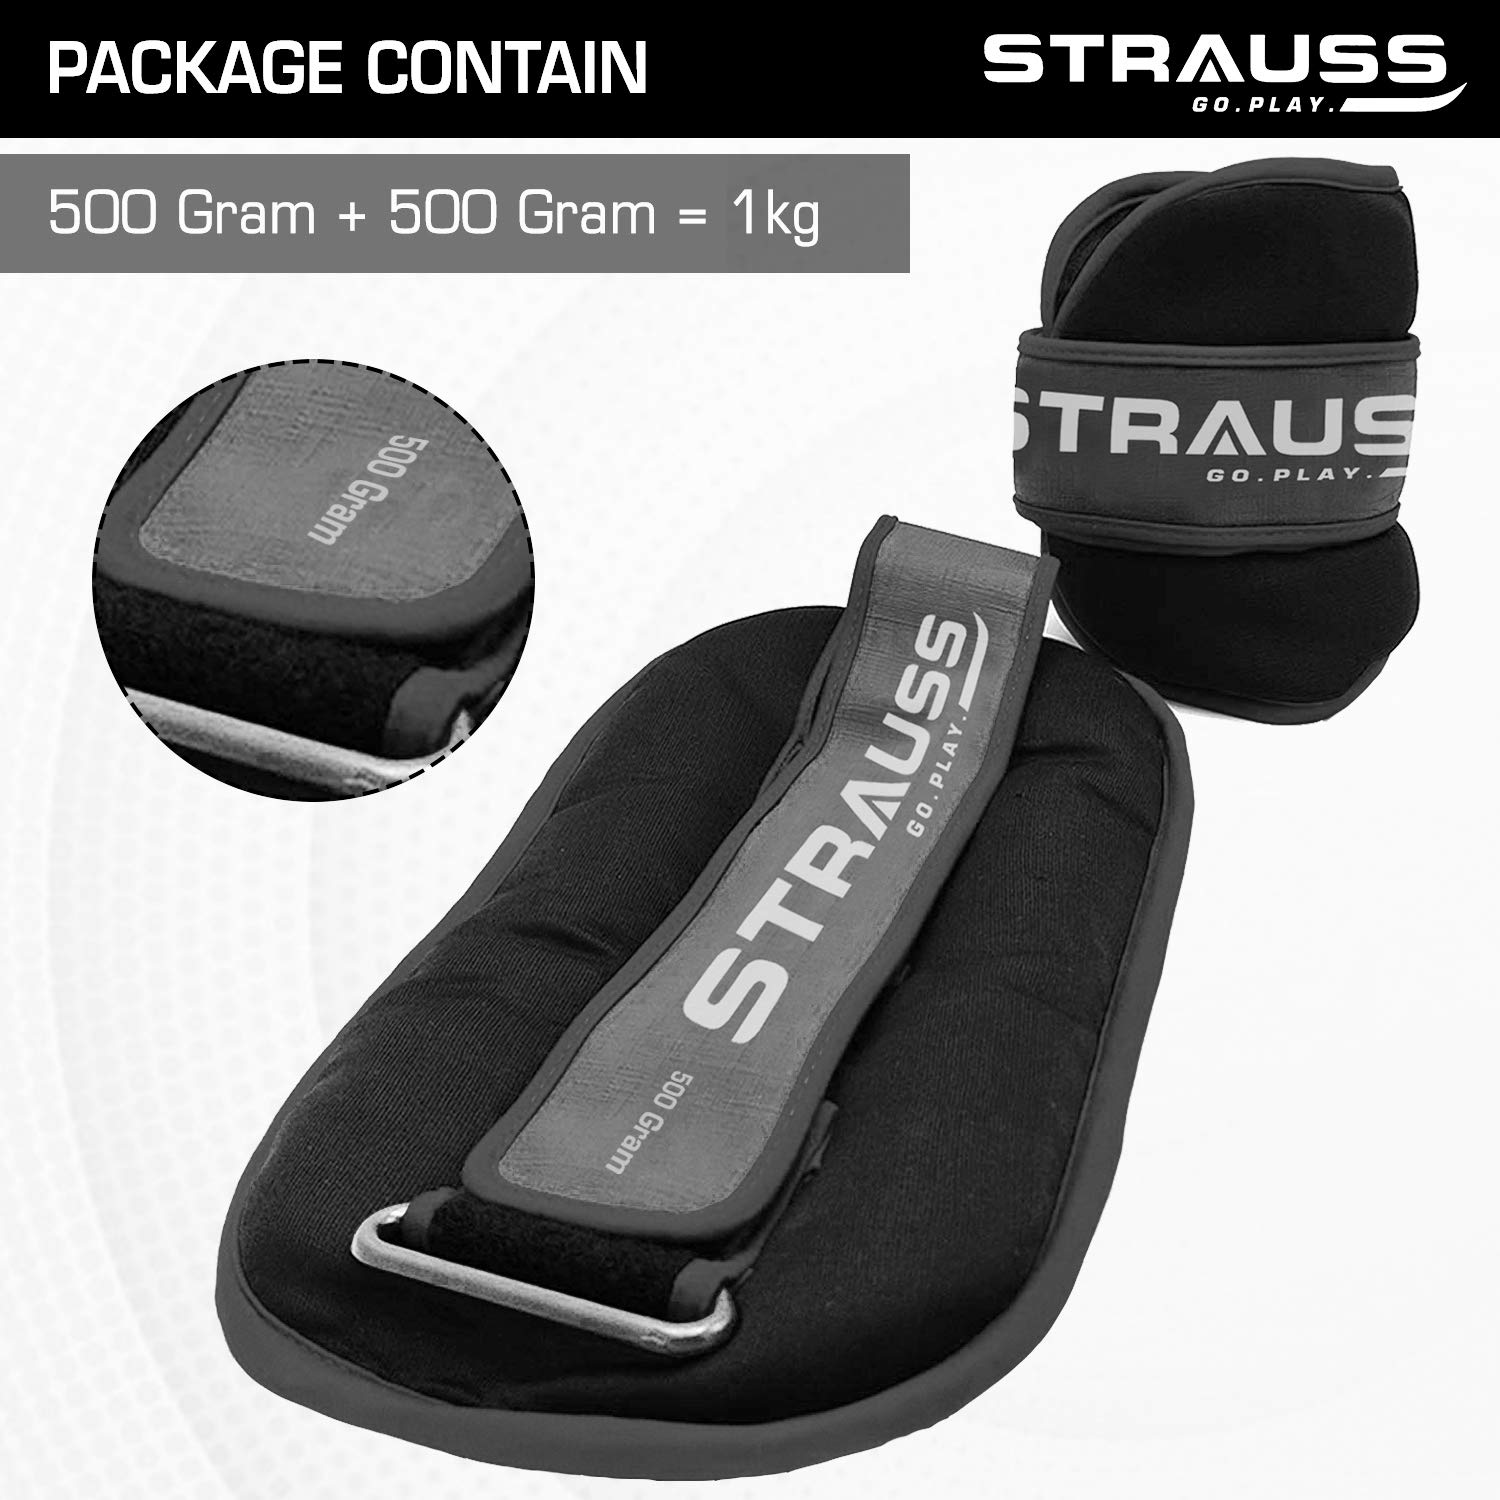 Strauss Round Shape Adjustable Ankle Weight/Wrist Weights 0.5 KG X 2 | Ideal for Walking, Running, Jogging, Cycling, Gym, Workout & Strength Training | Easy to Use on Ankle, Wrist, Leg, (Black)